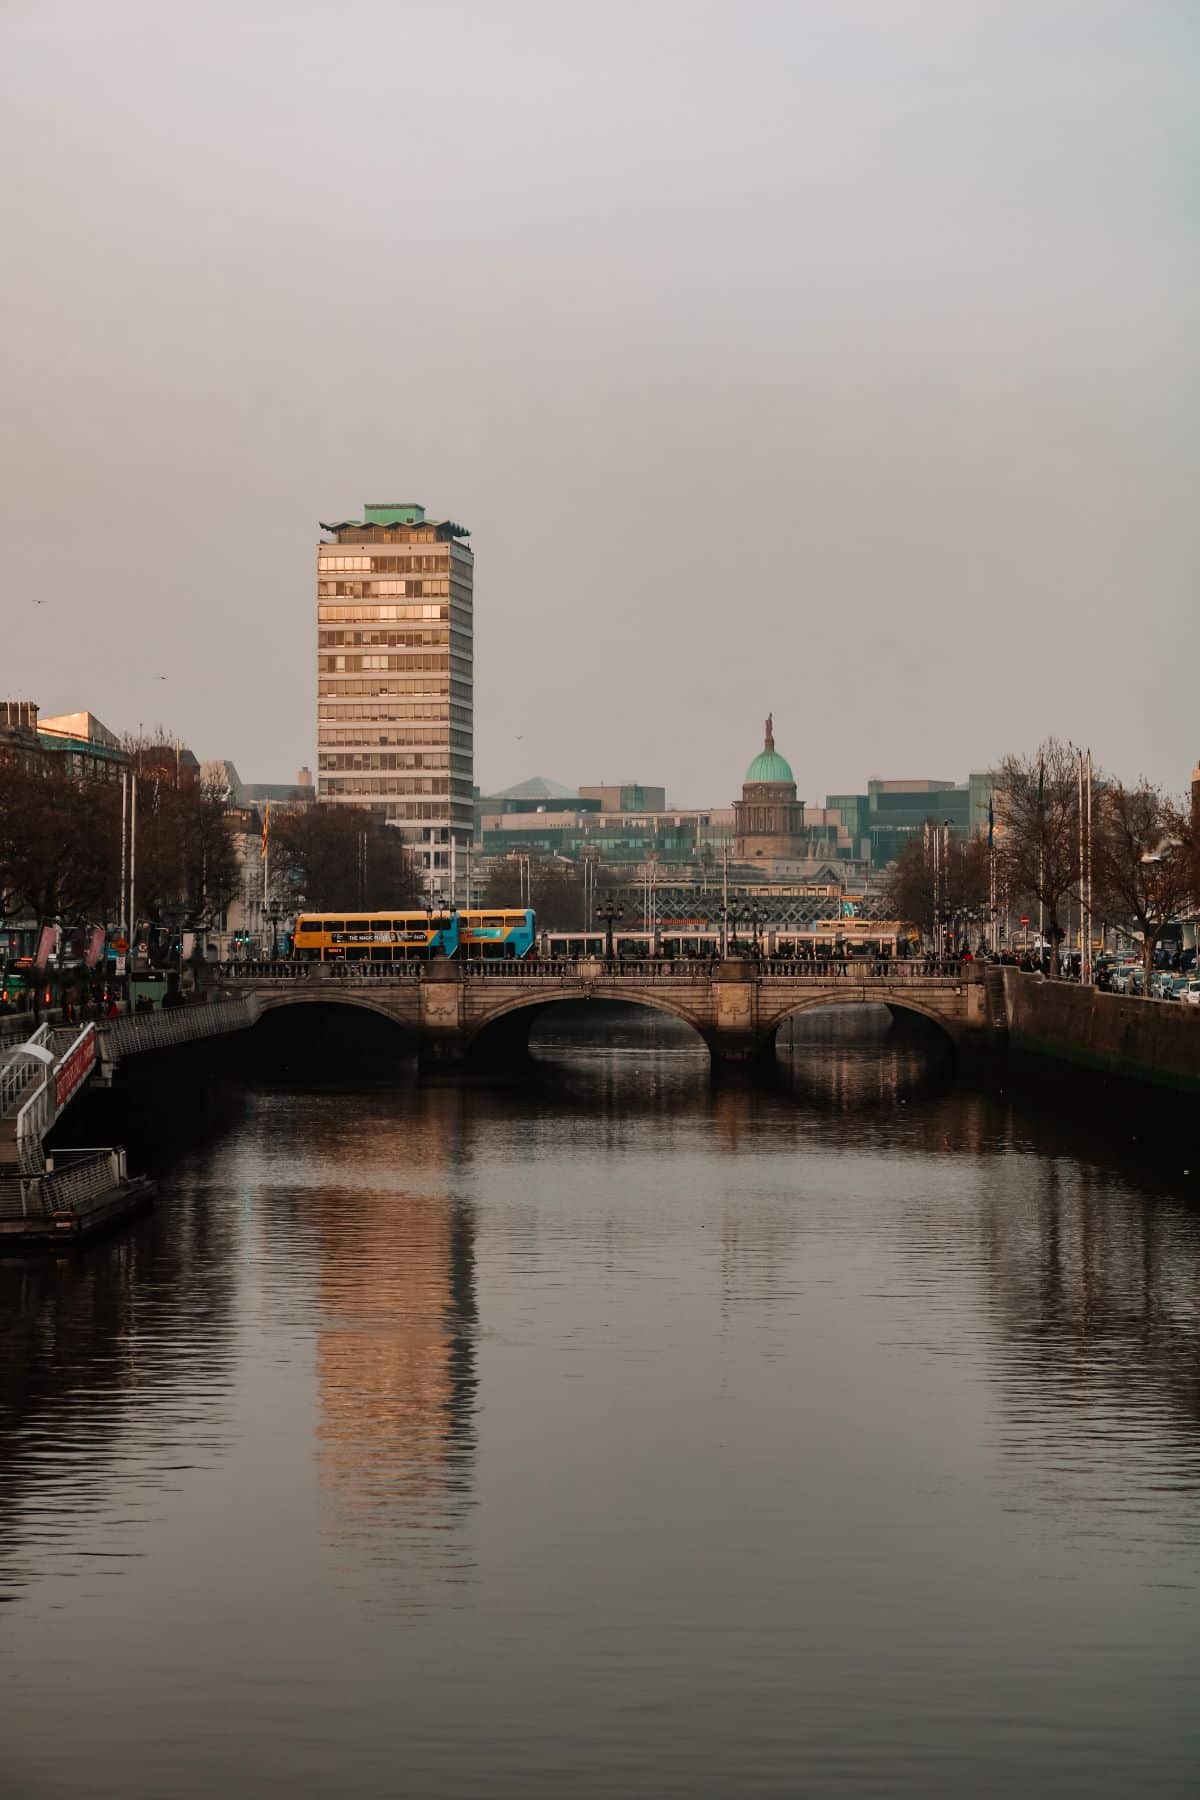 A view of Dublin city buildings and water.